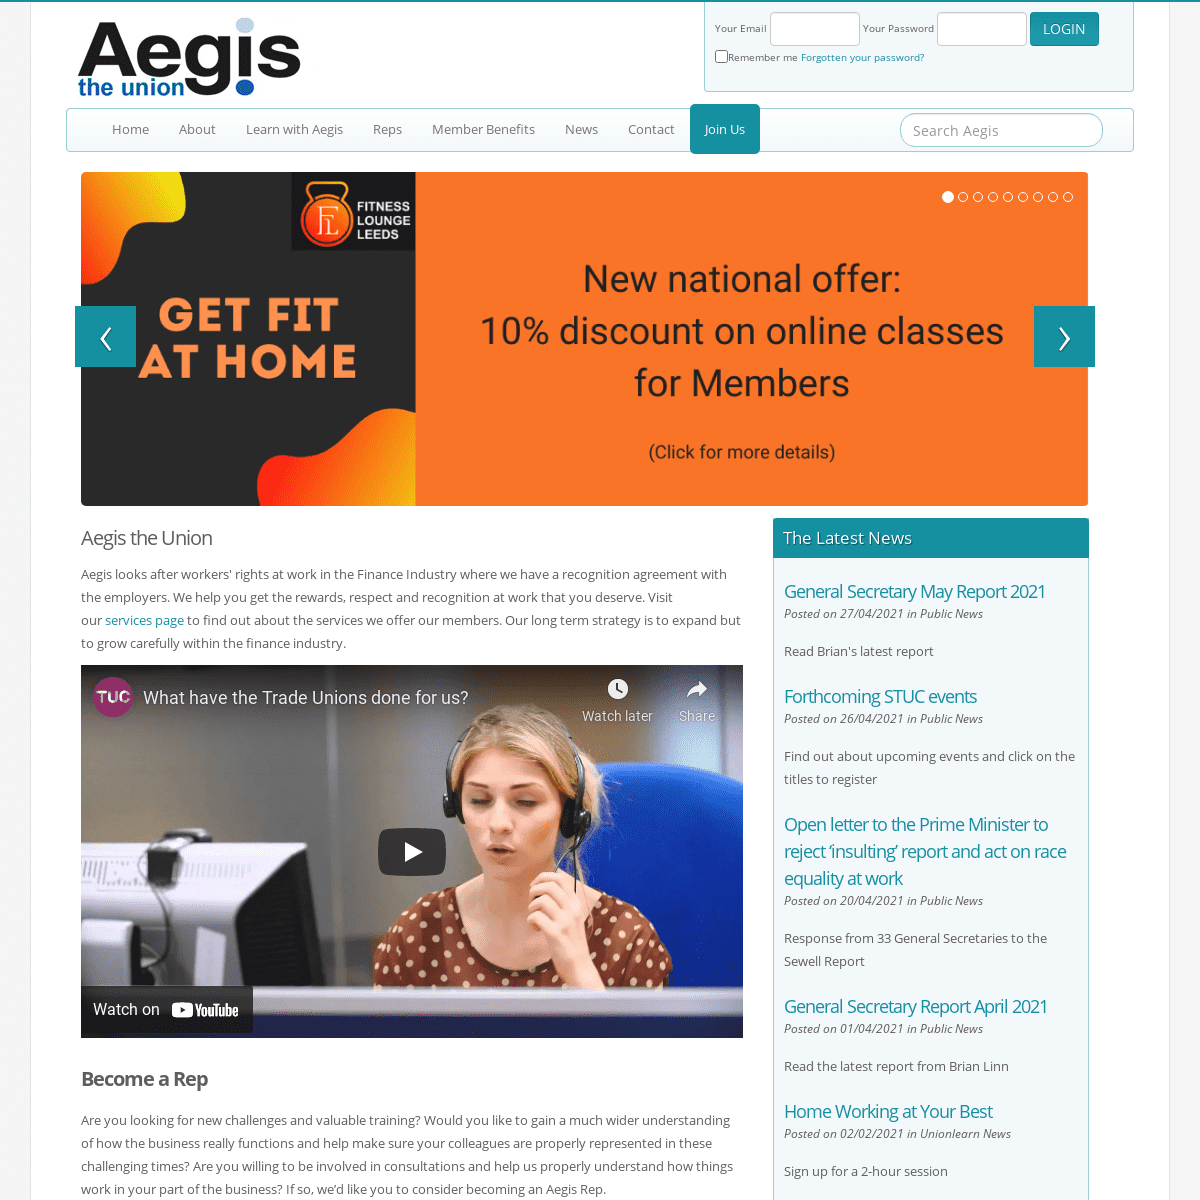 A complete backup of https://aegistheunion.co.uk